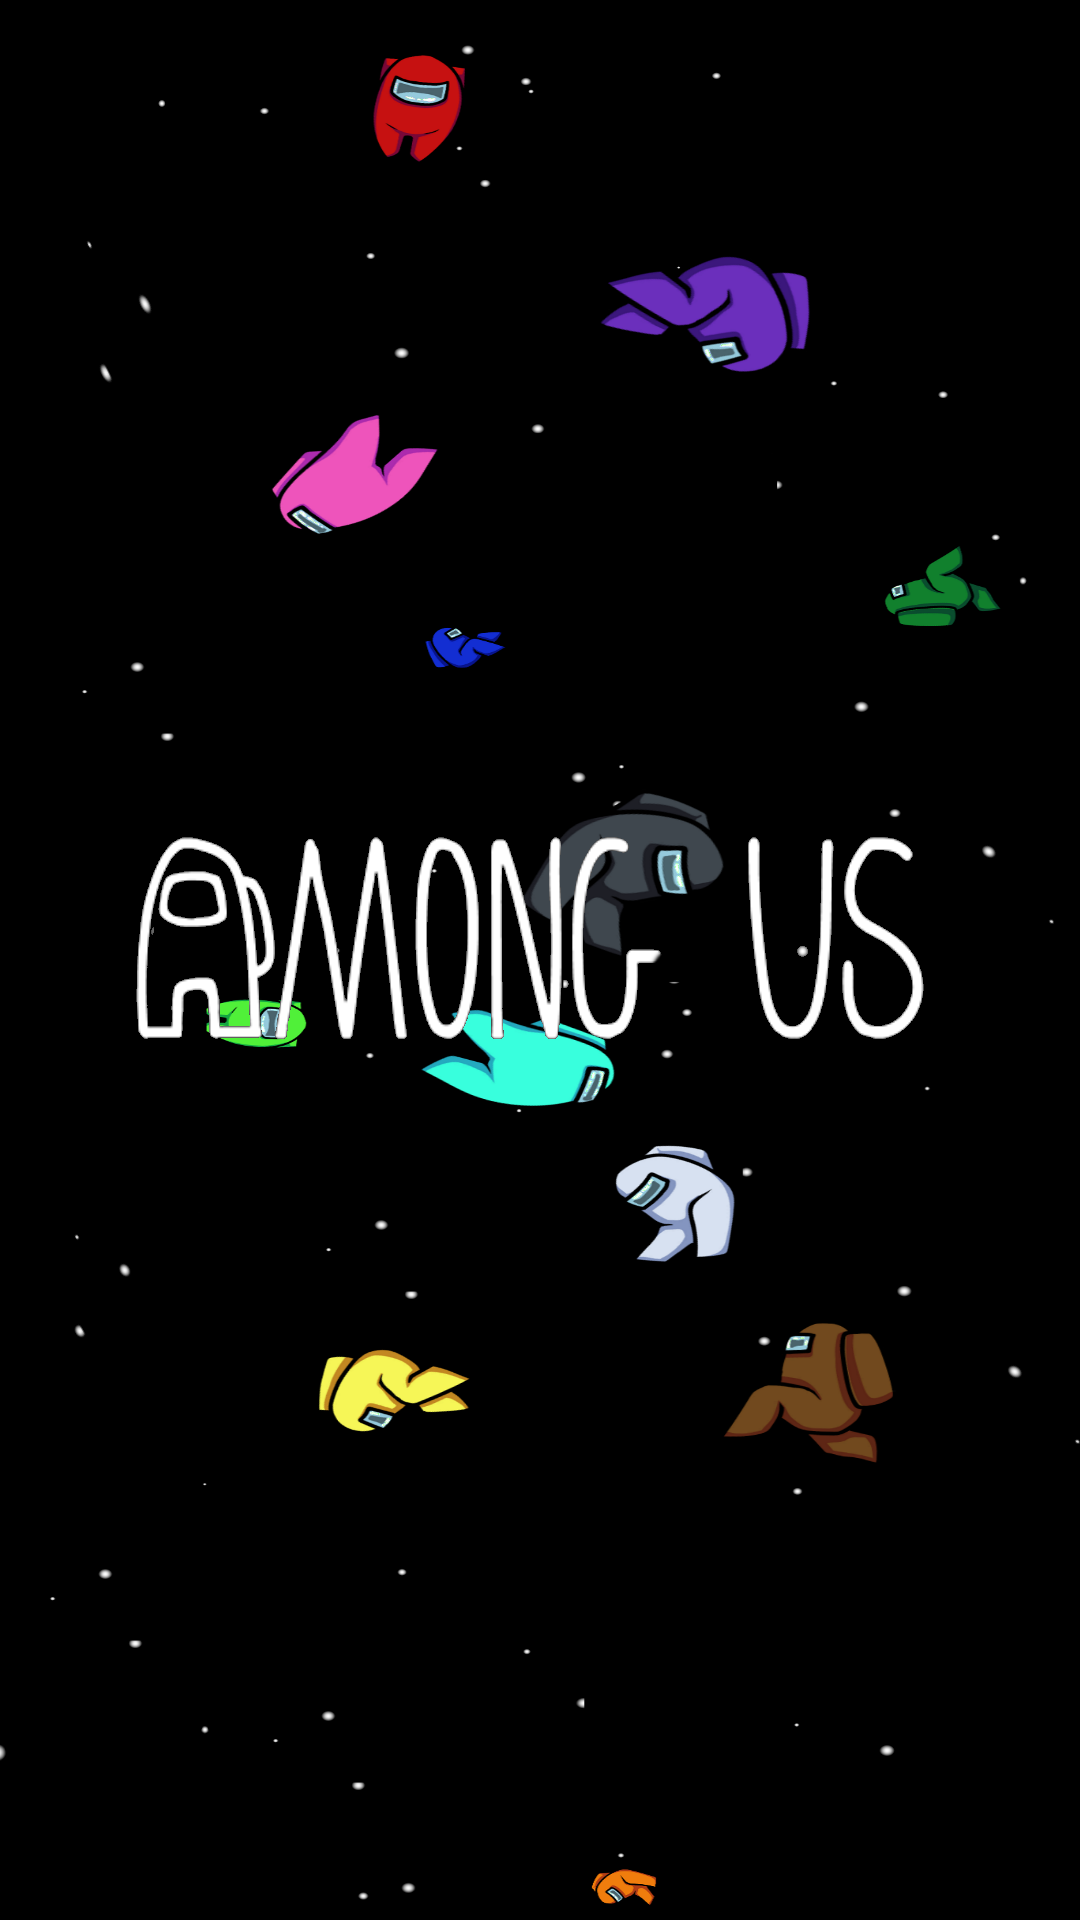 Among Us Phone Wallpapers Wallpaper Cave Dont touch my phone wallpapers. among us phone wallpapers wallpaper cave